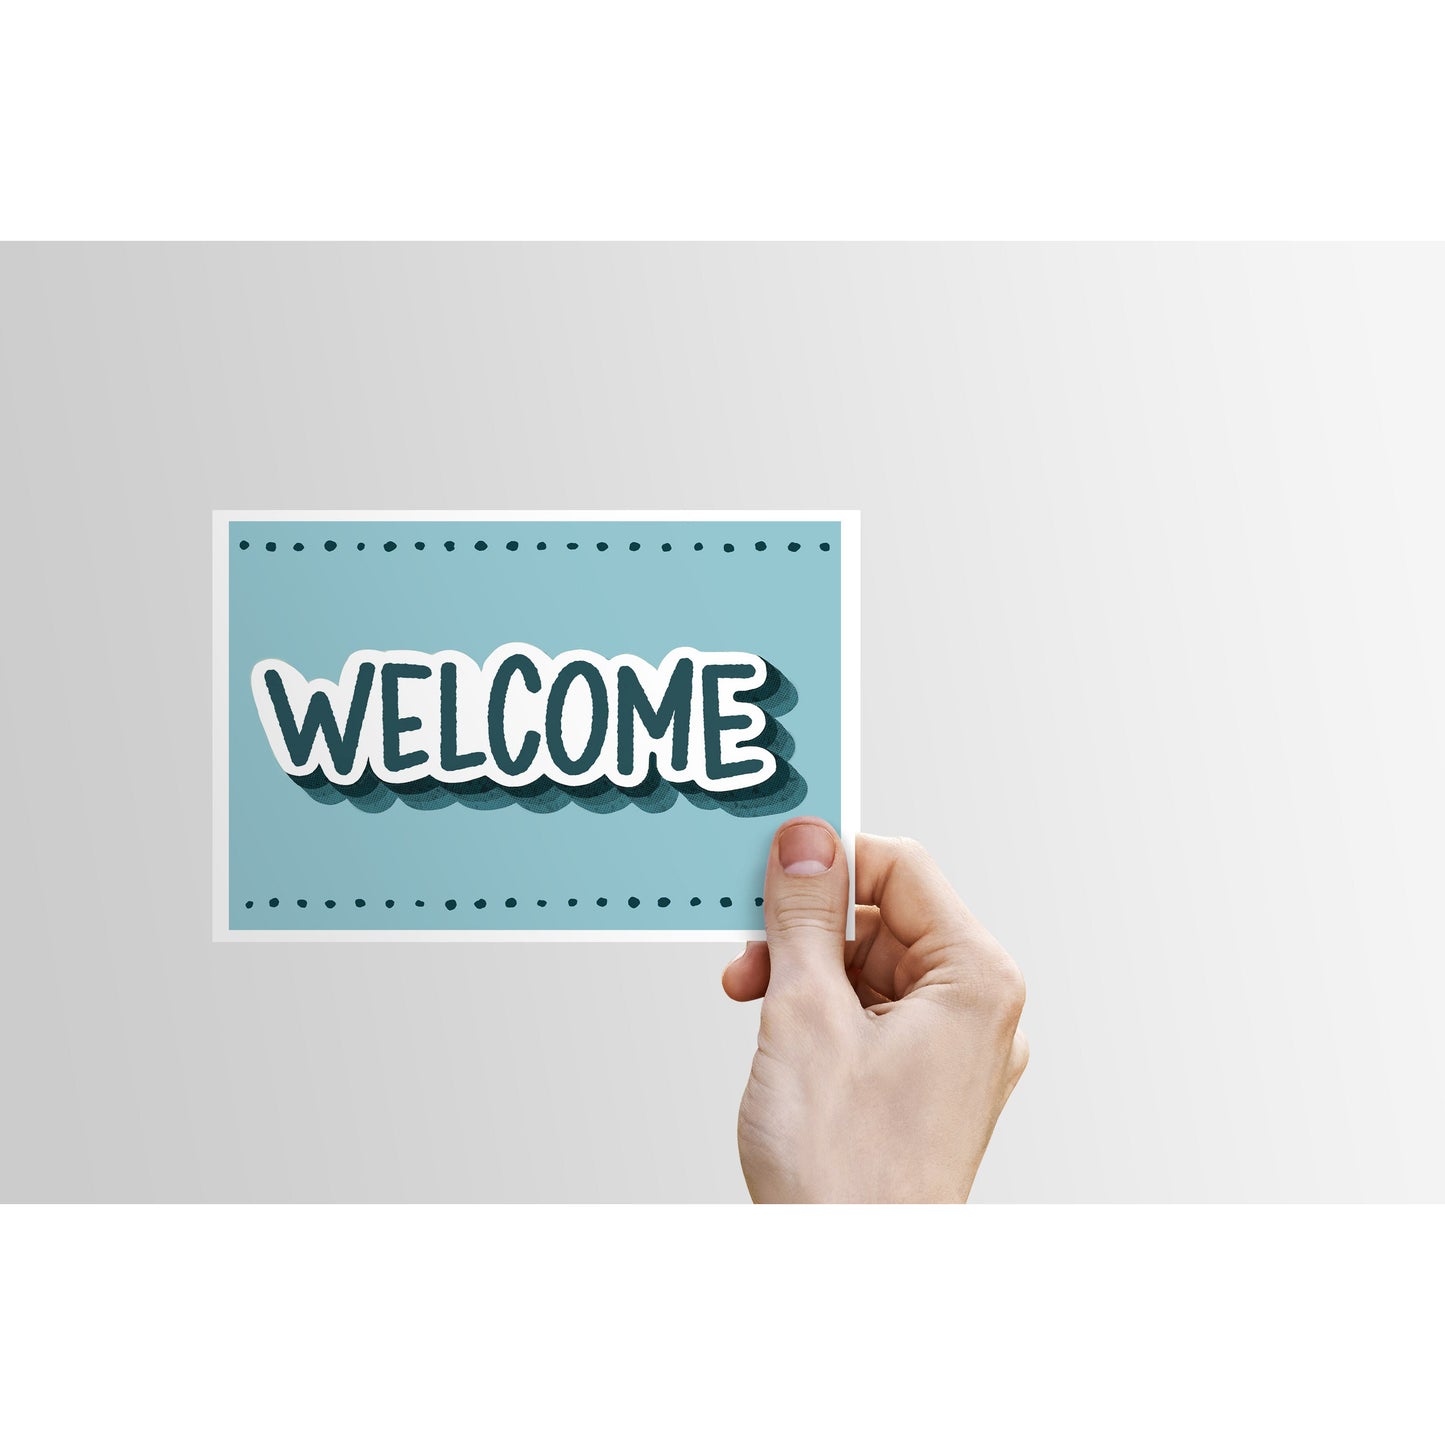 Welcome - Greeting Card | New Neighbor, New Employee, New Co-Worker, Guest Speaker